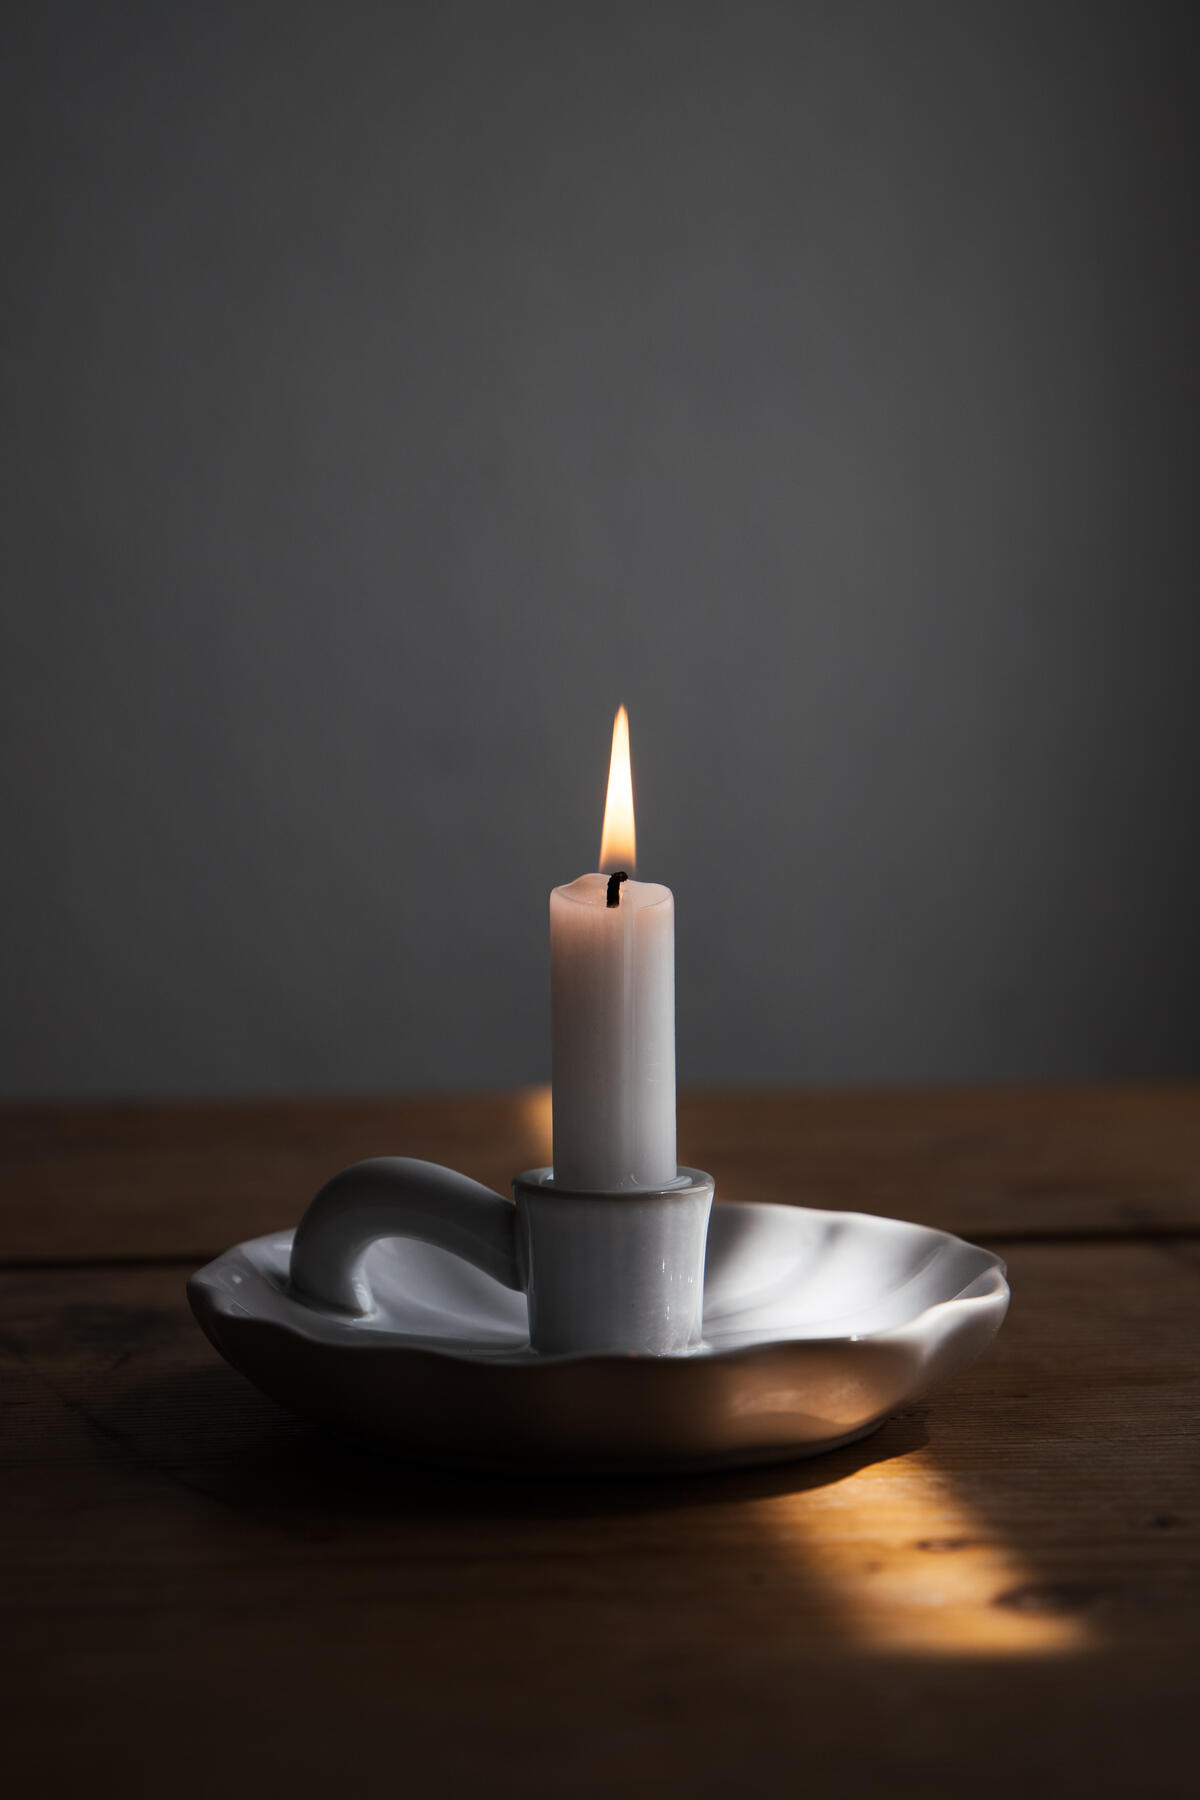 Candle in a porcelain candlestick